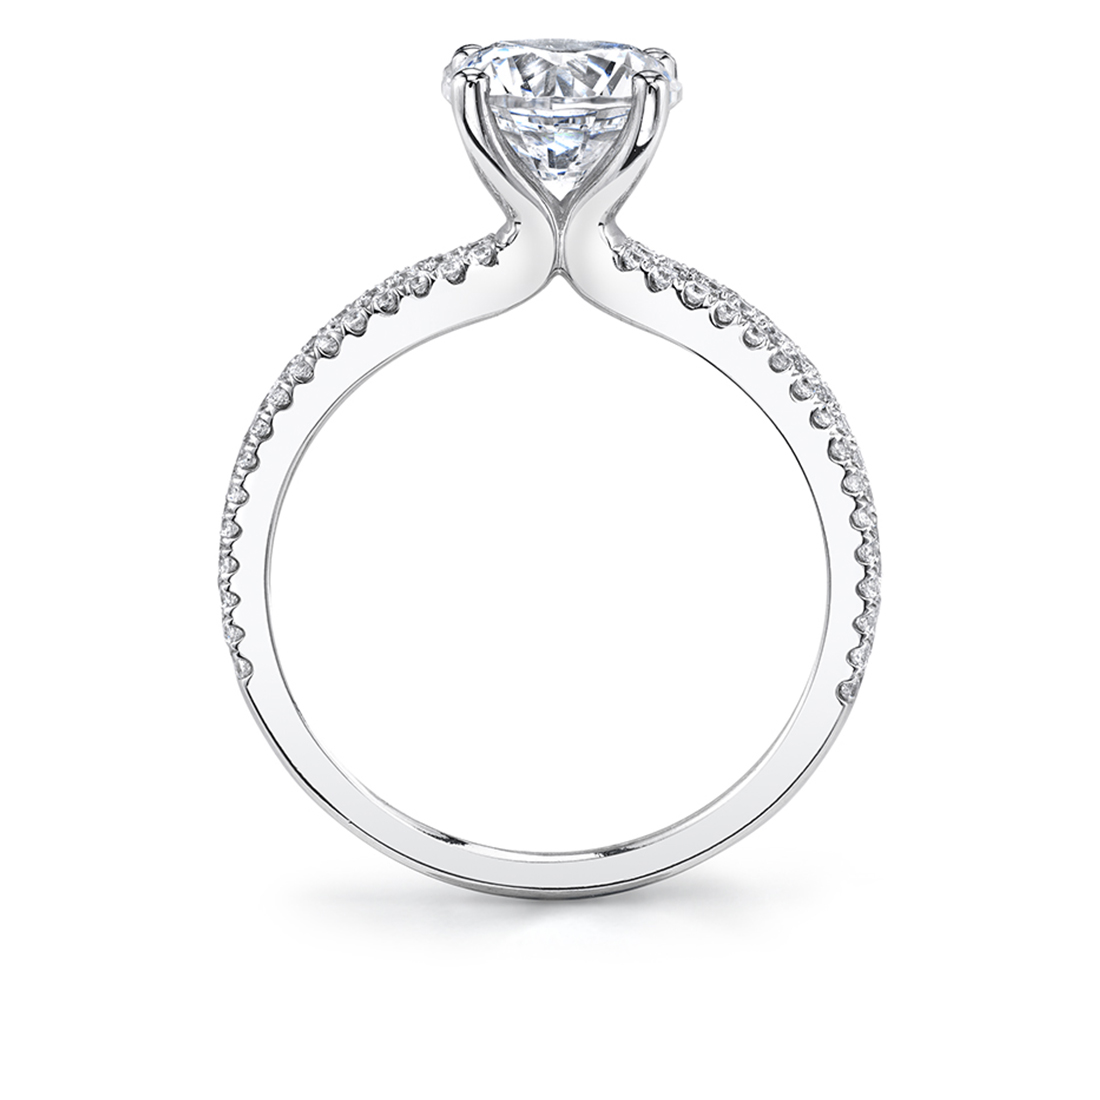 Profile image of Split Band Engagement Ring in white Gold